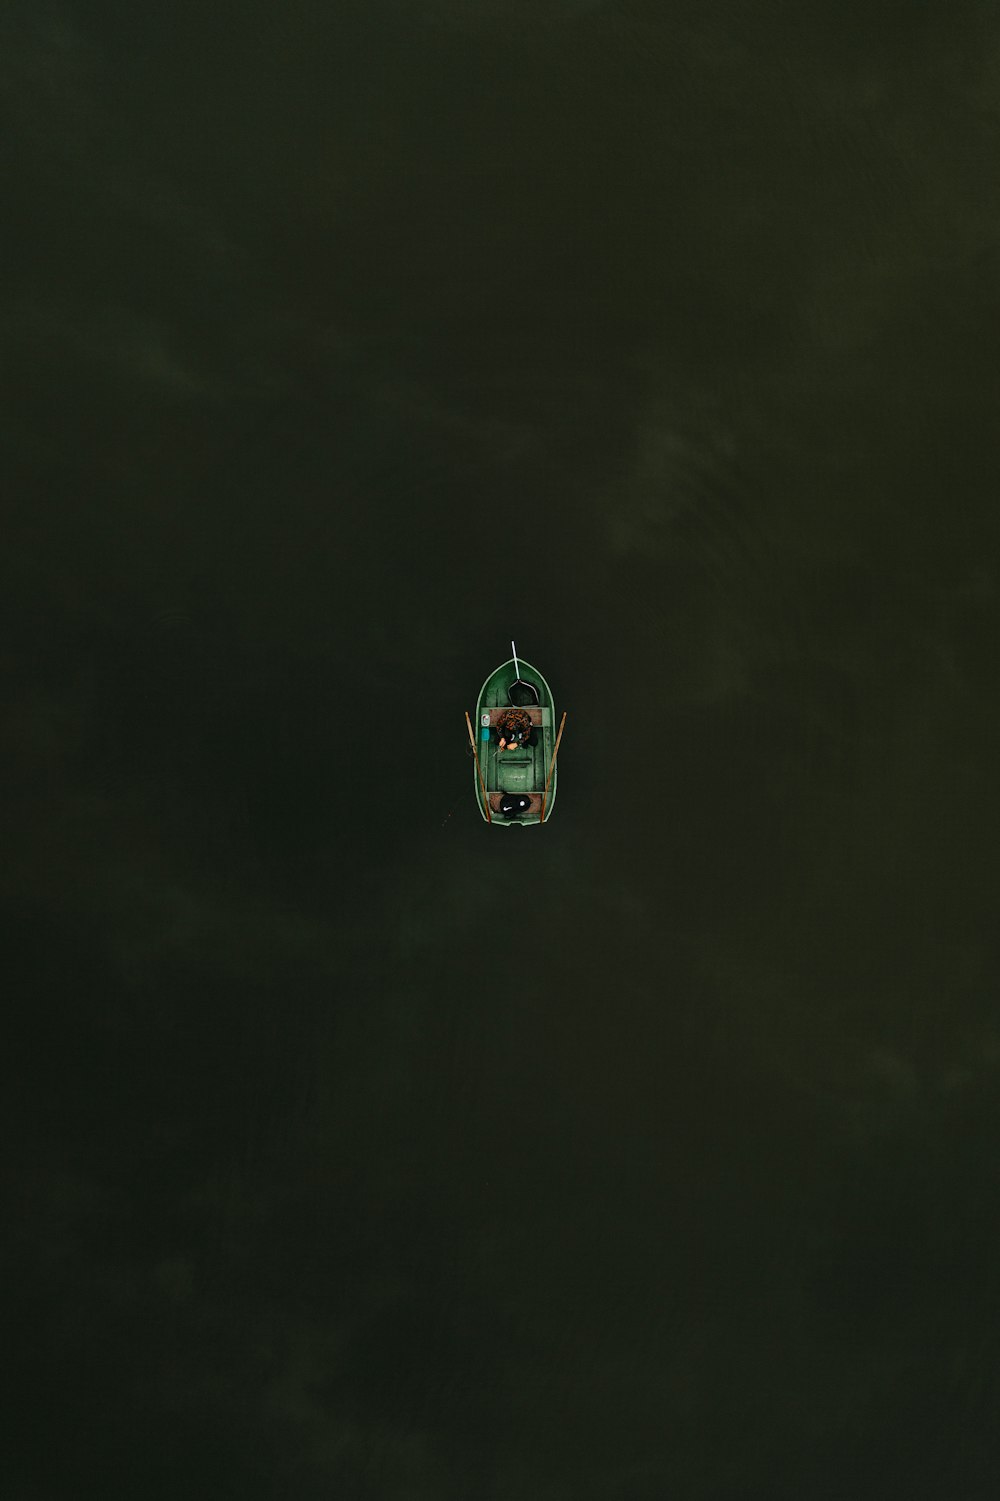 a small green boat floating on top of a body of water